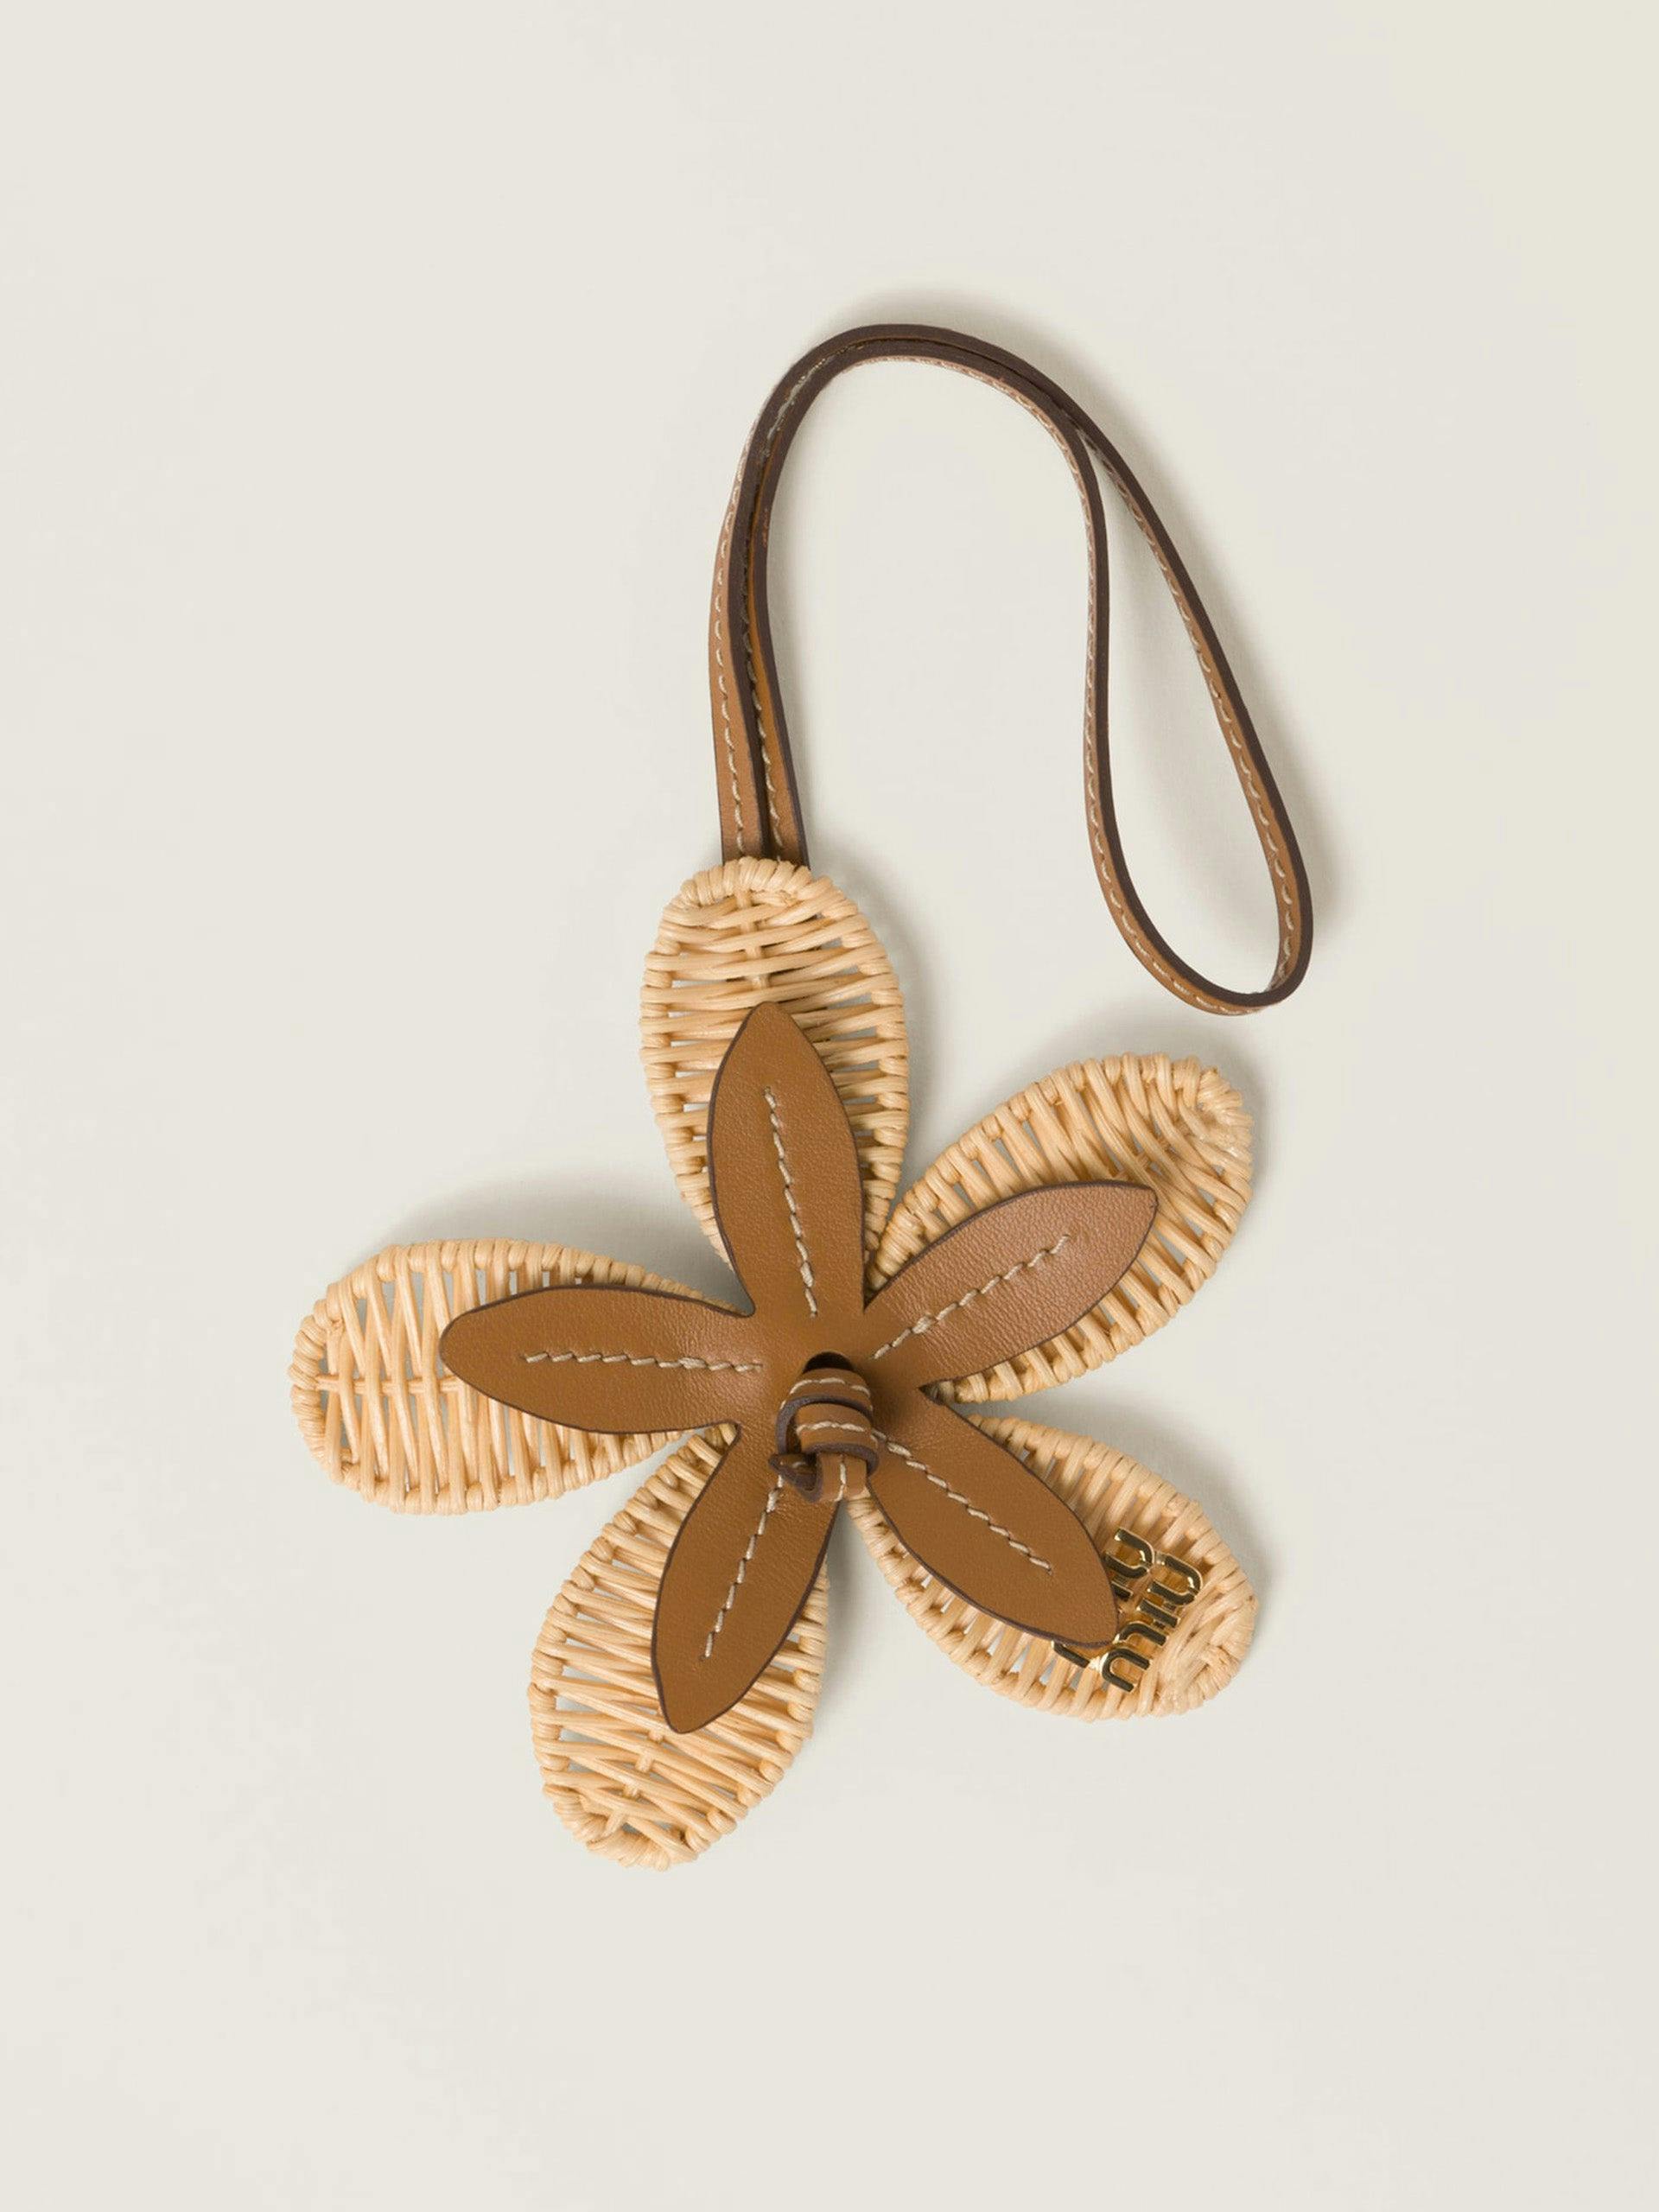 Wicker and leather flower bag accessory